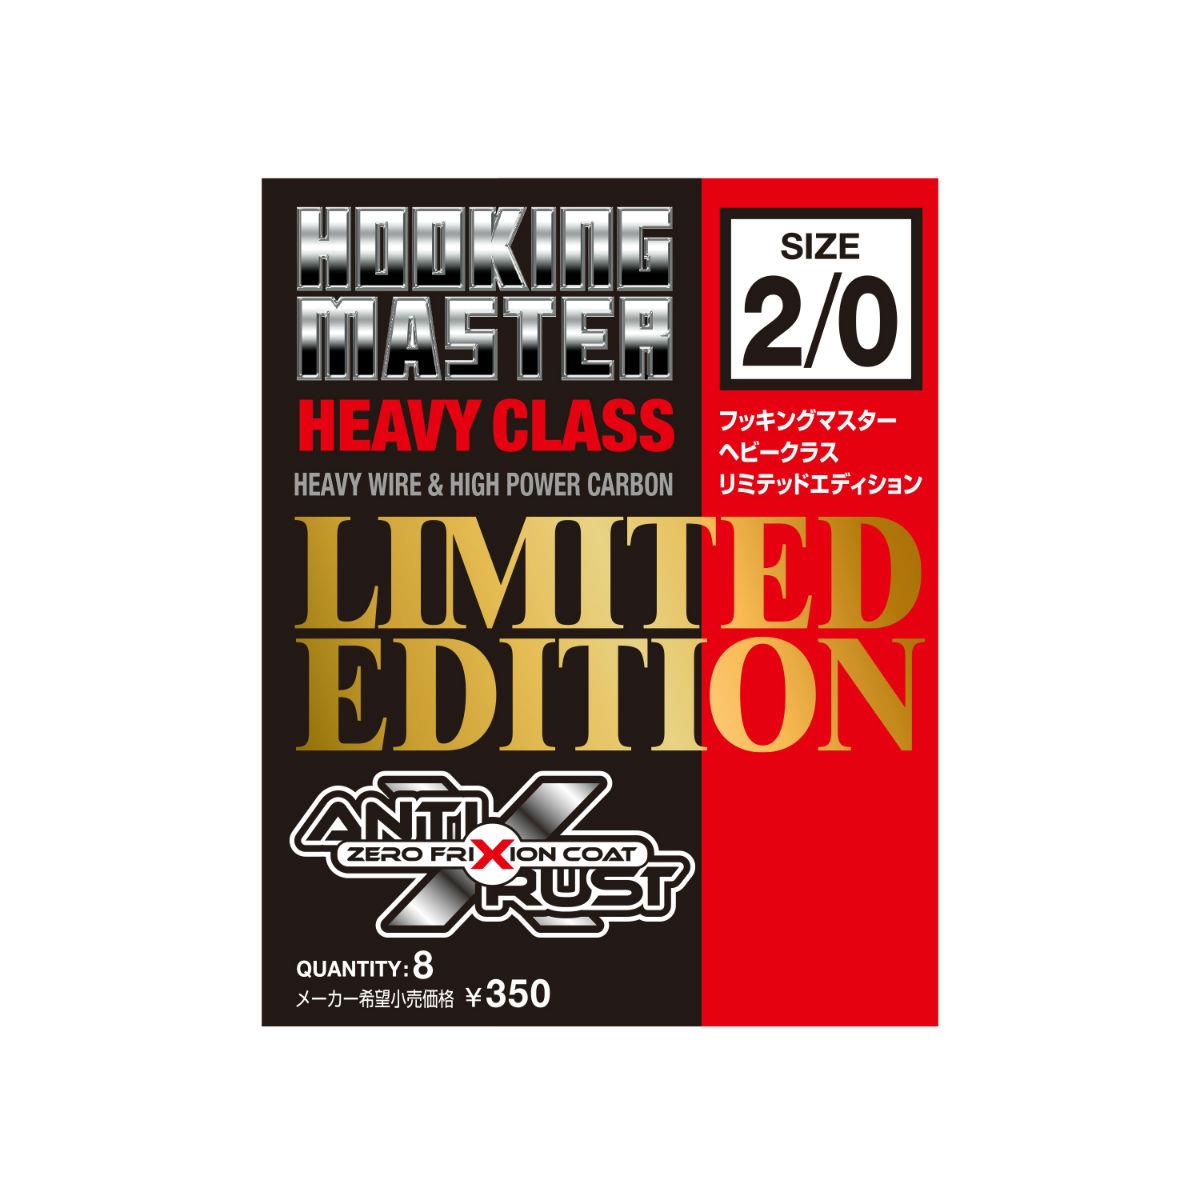 CARLIGE OFFSET NOGALES LIMITED EDITION HEAVY CLASS NR.1